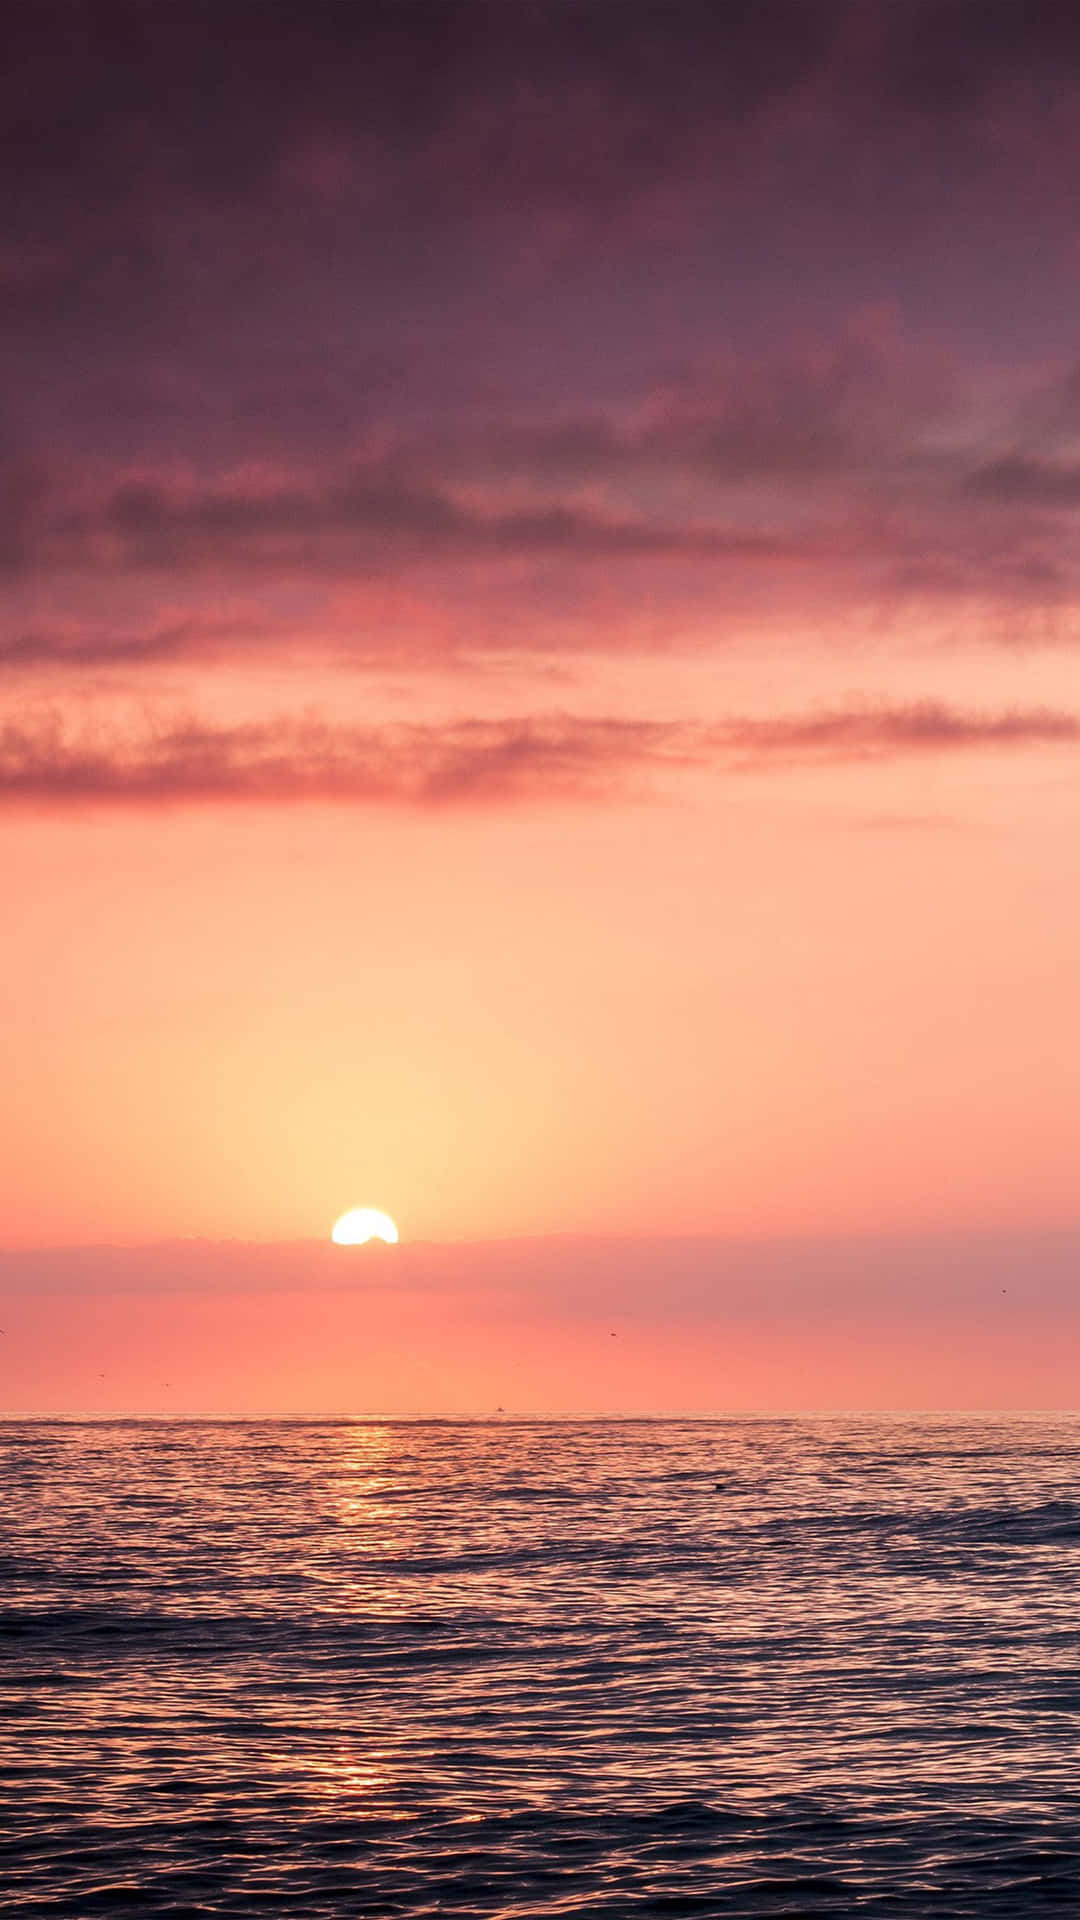 Enjoy Evening Sunsets with an Aesthetic iPhone Wallpaper